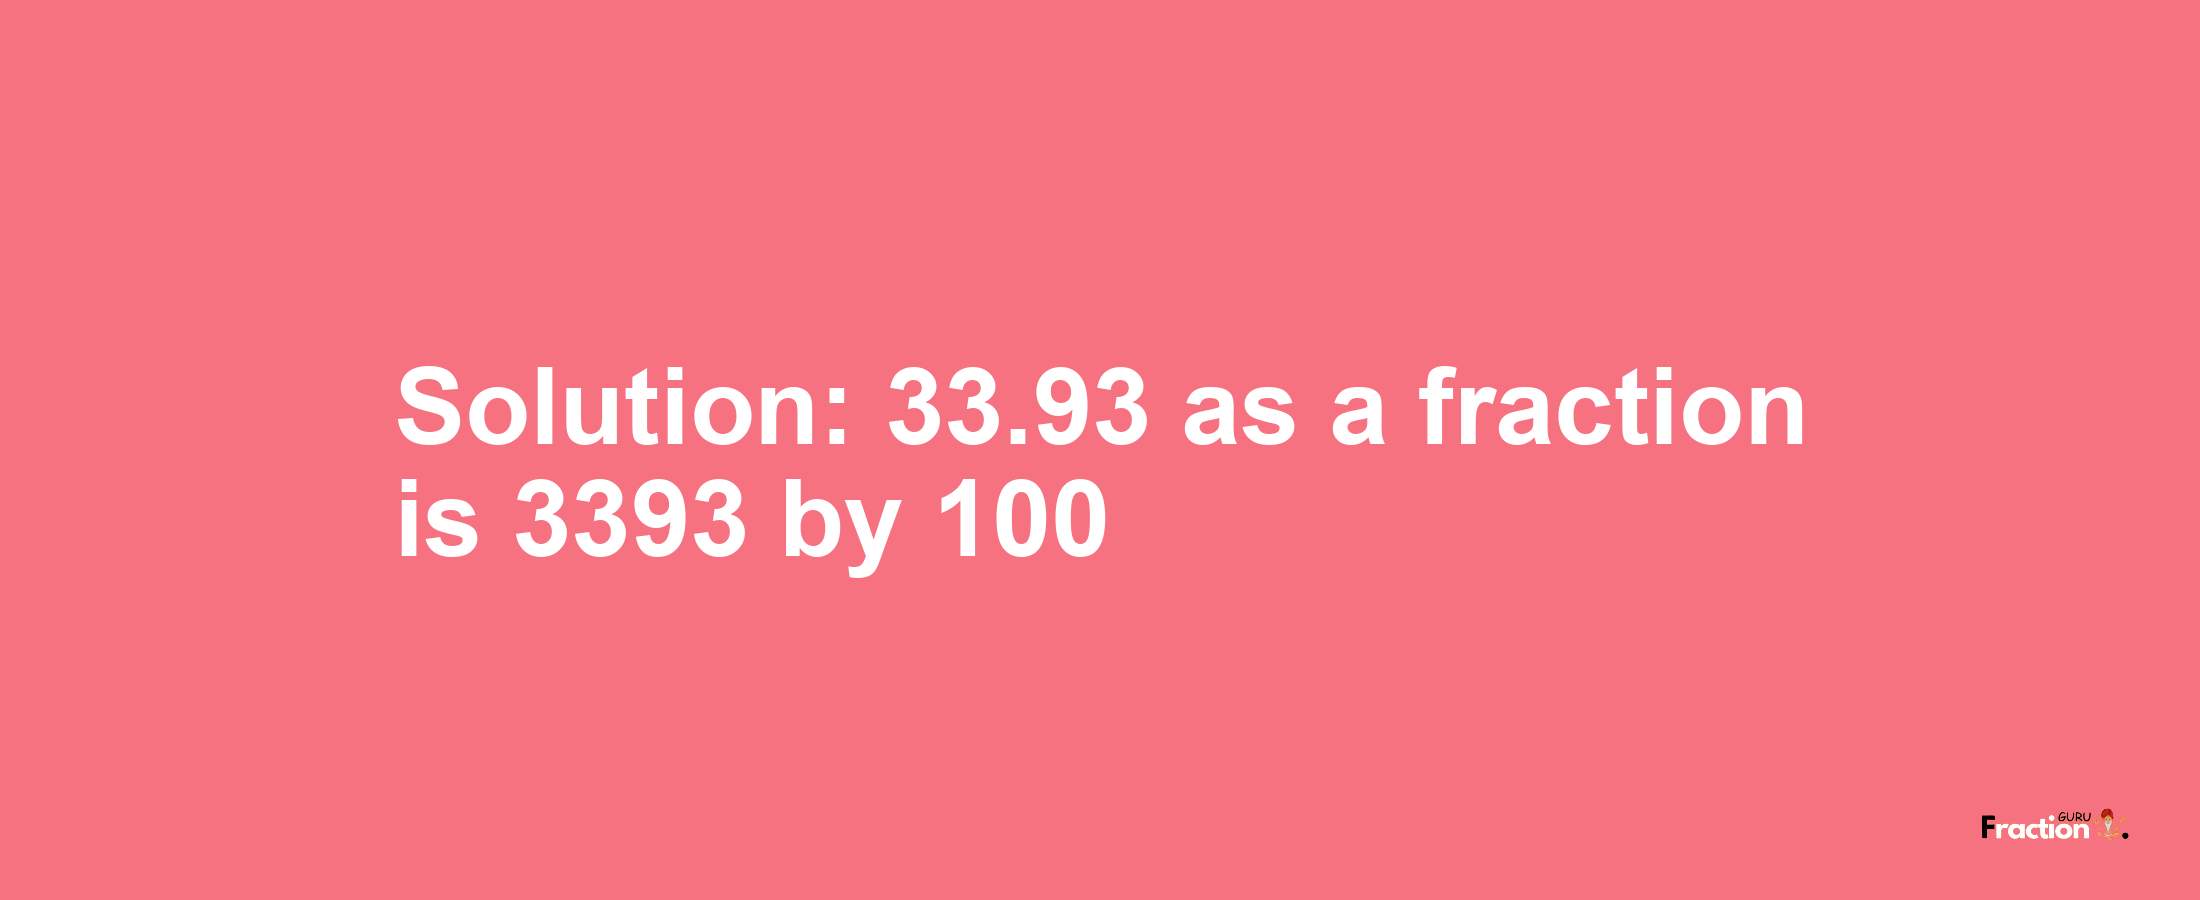 Solution:33.93 as a fraction is 3393/100